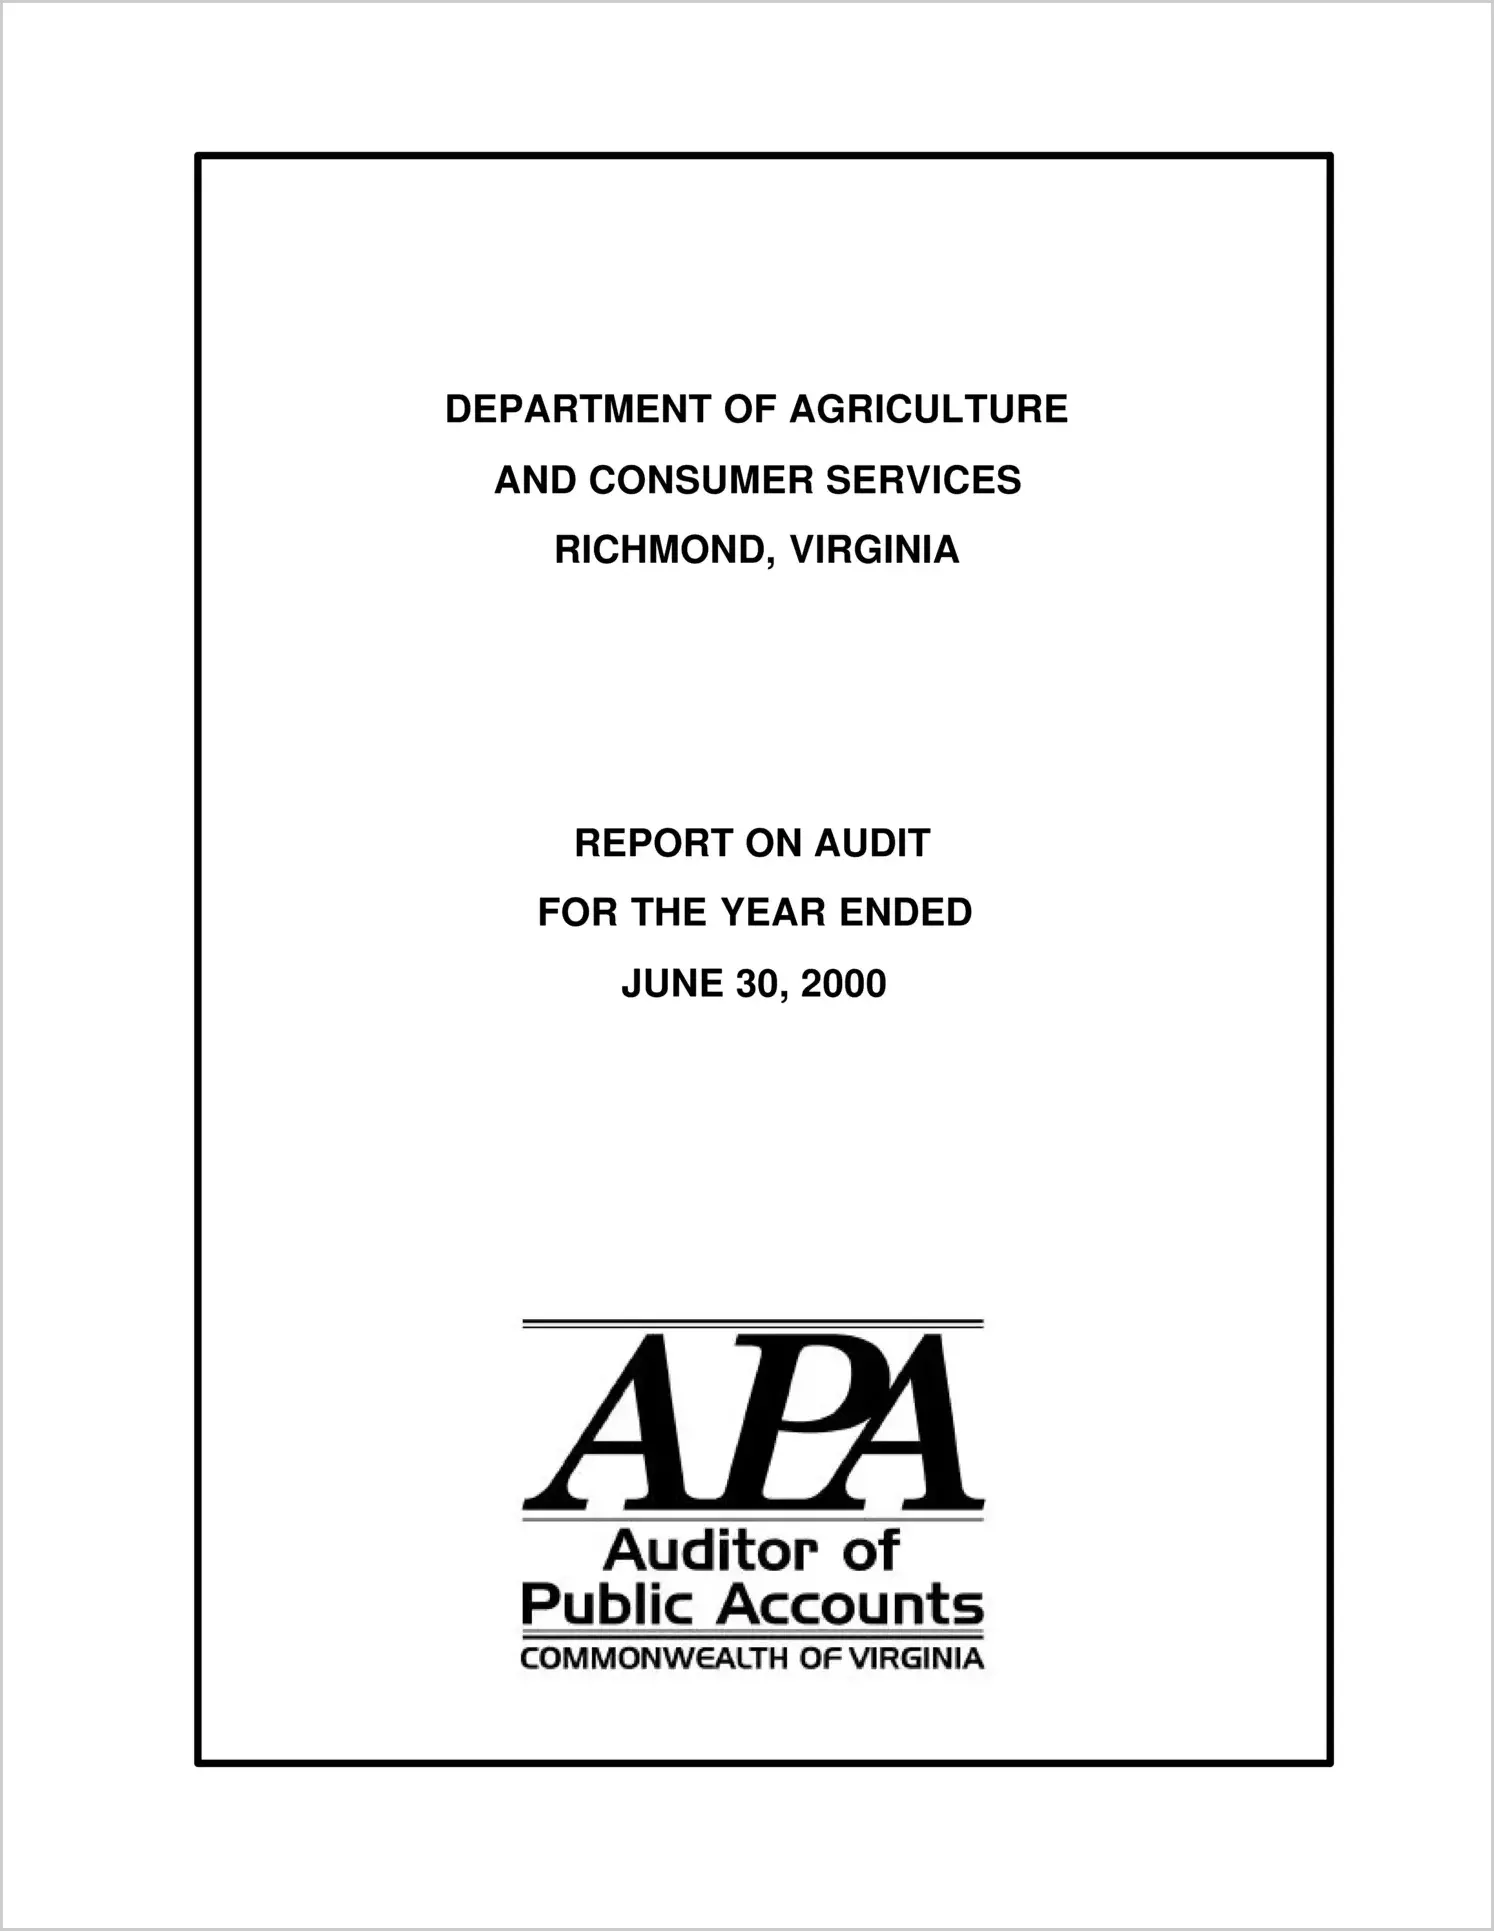 Department of Agriculture and Consumer Services for the year ended June 30, 2000